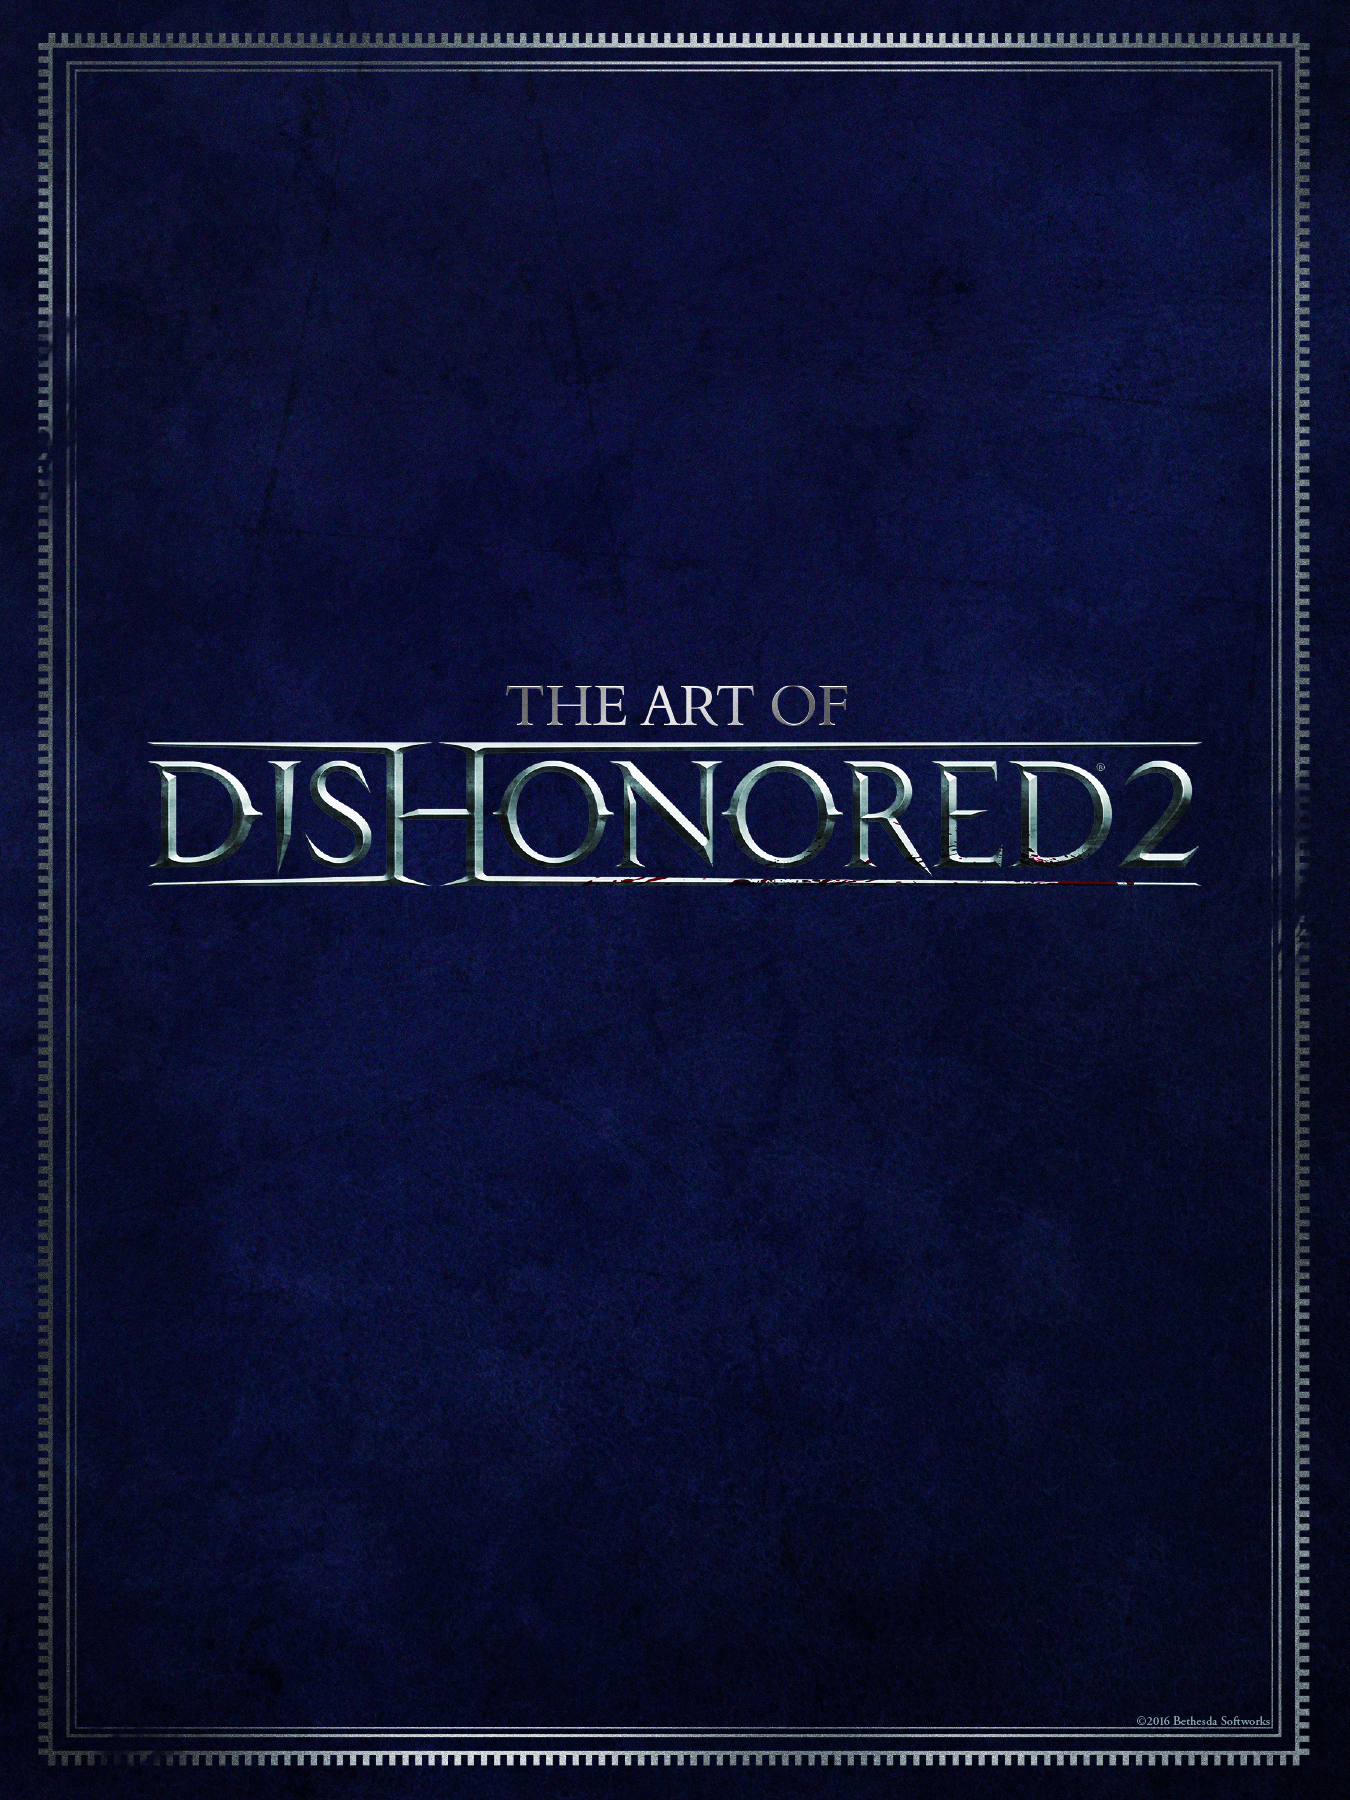 Art of Dishonored 2 Hardcover